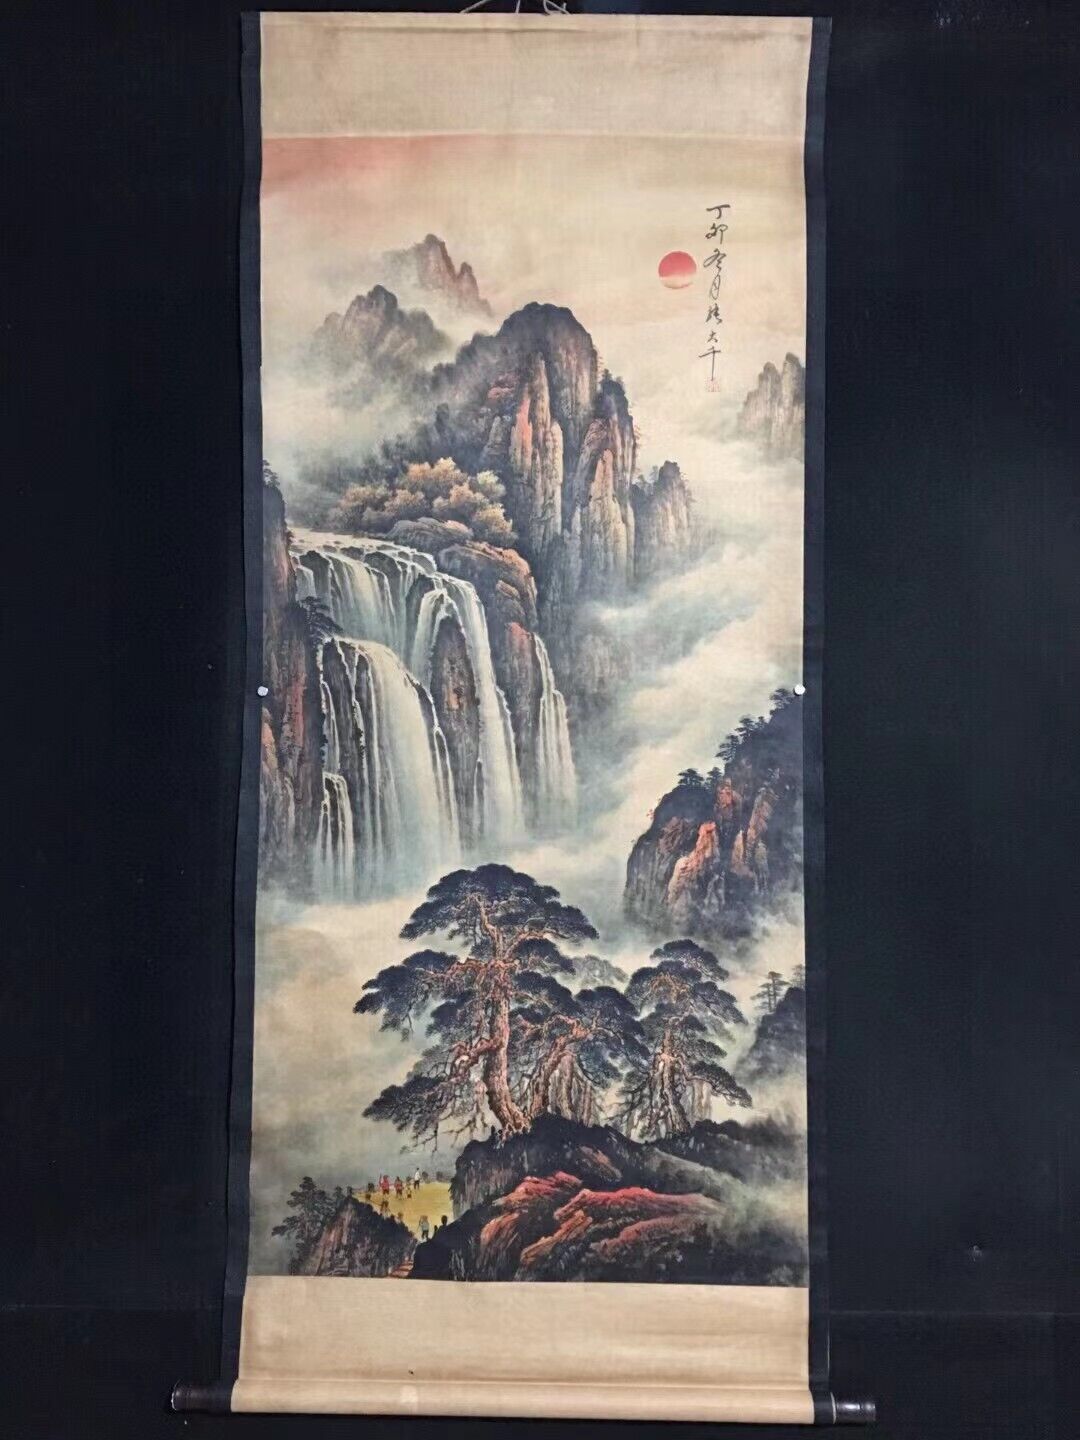 Old Chinese antique painting scroll Landscape By Zhang Daqian 张大千 山水